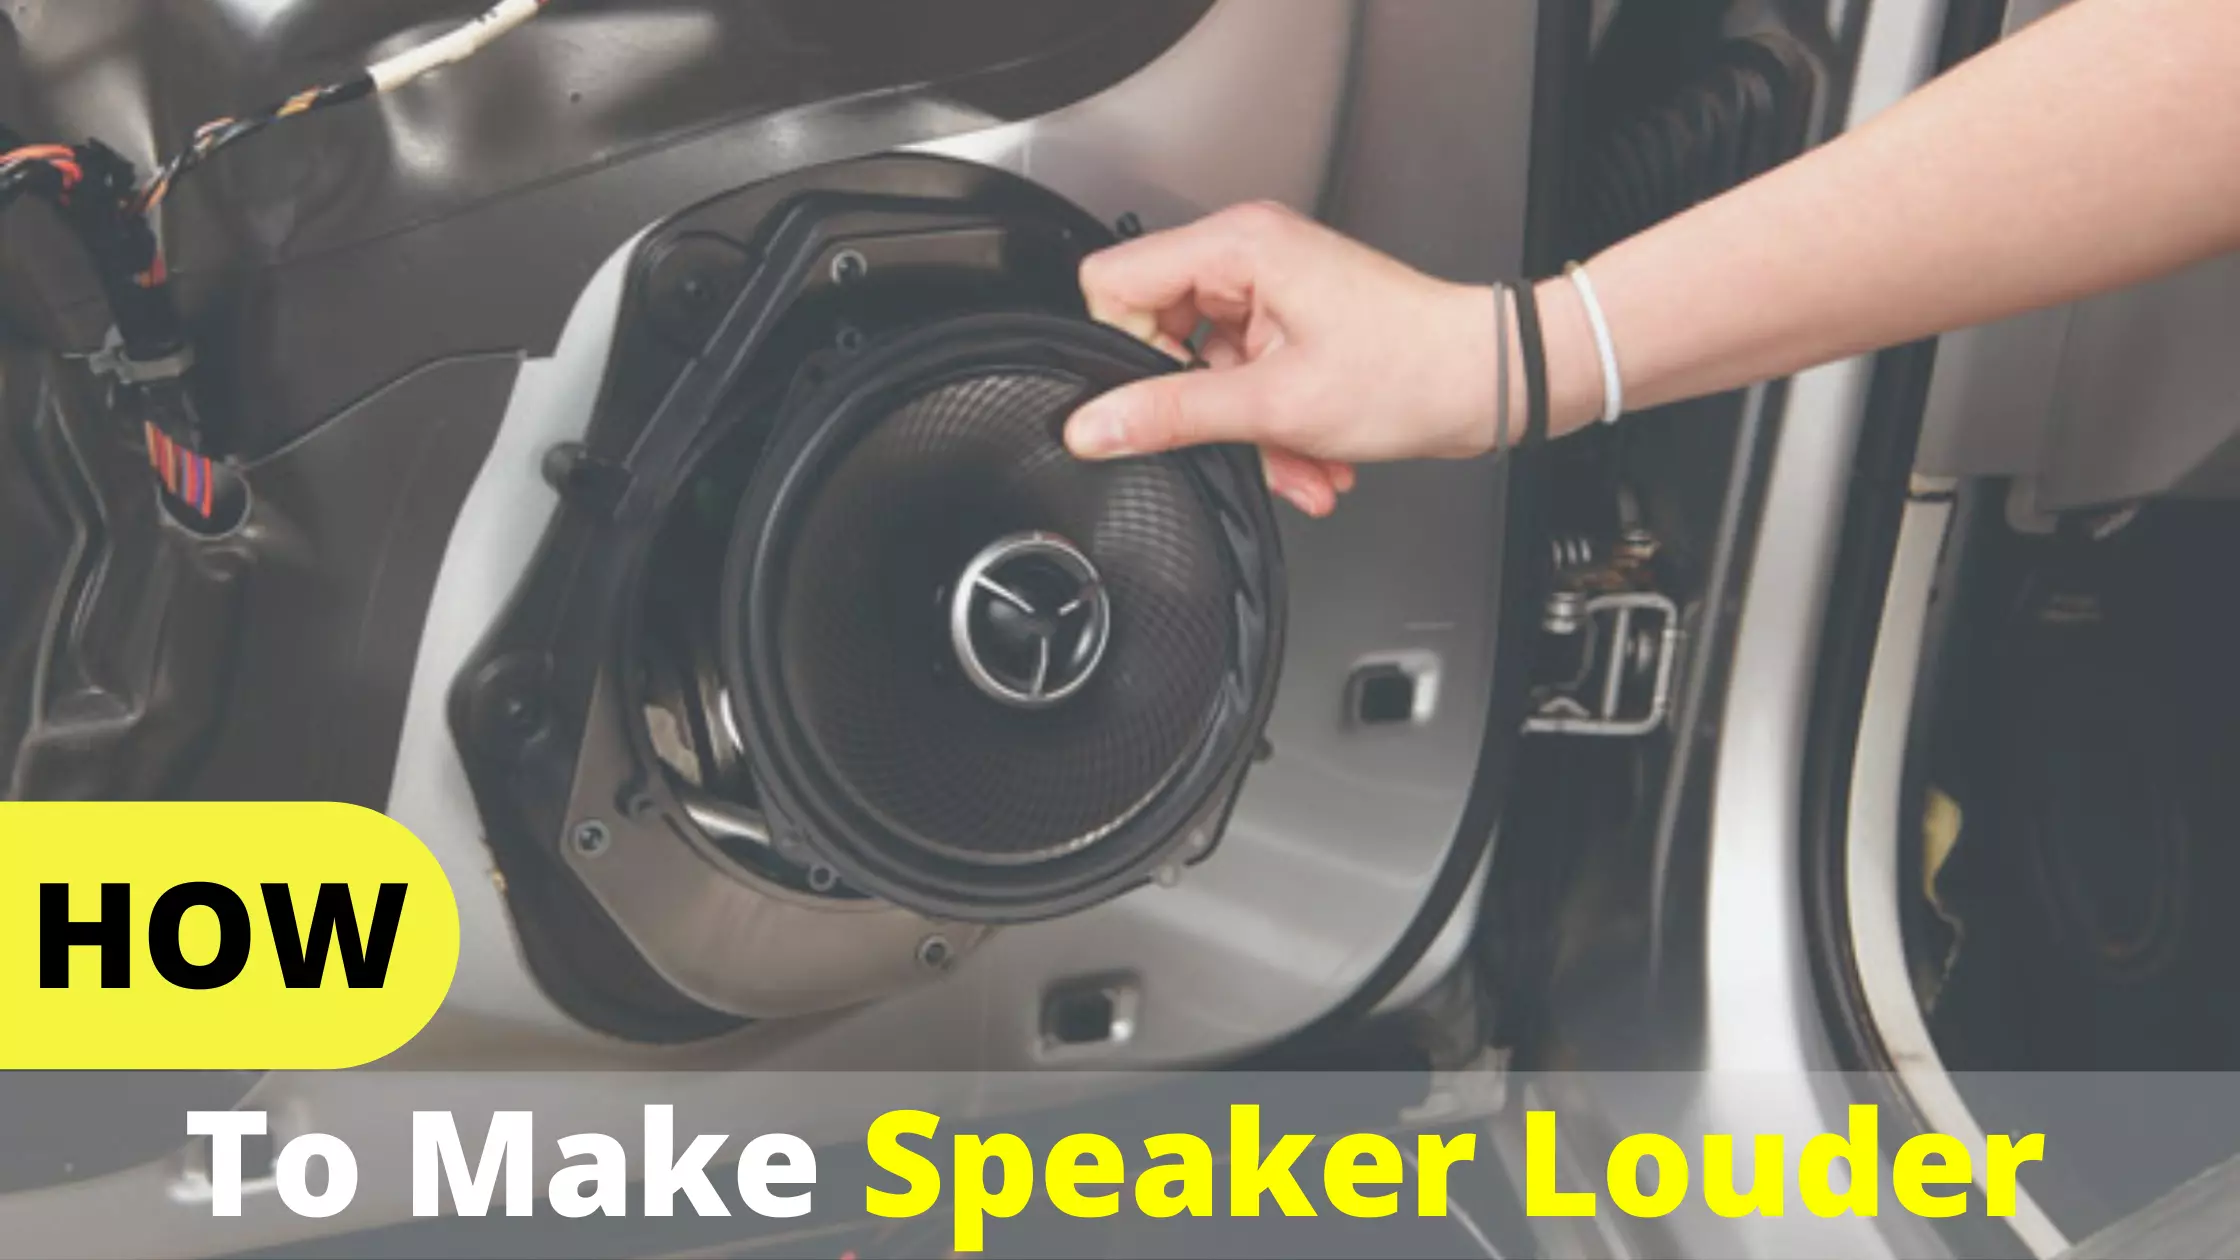 How to make speakers louder?